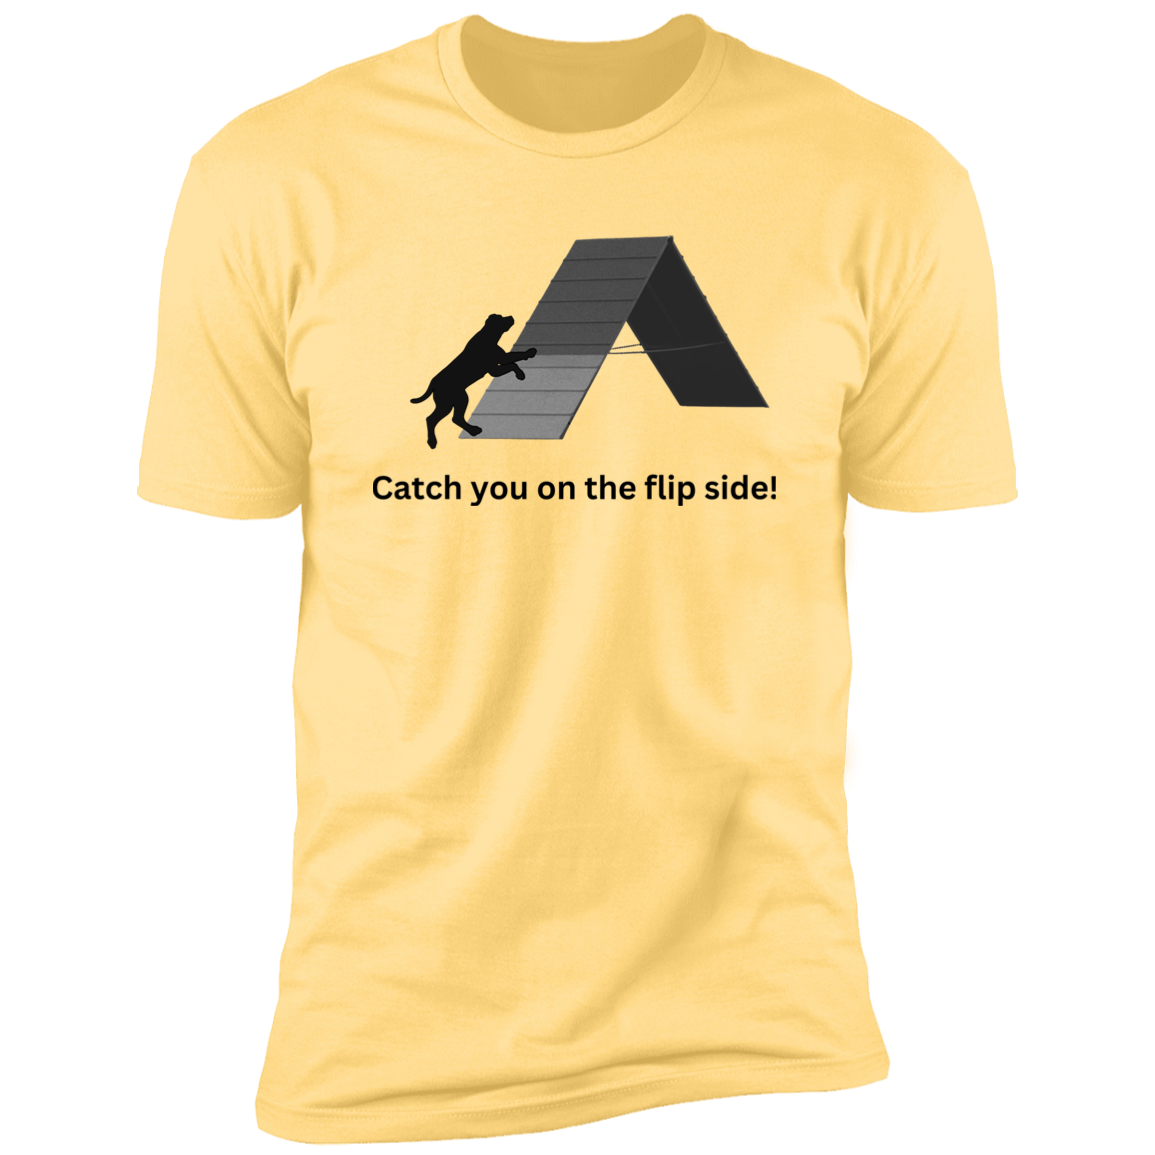 Catch You on the Flip Side T-shirt, Dog Agility Shirt for humans, in banana cream